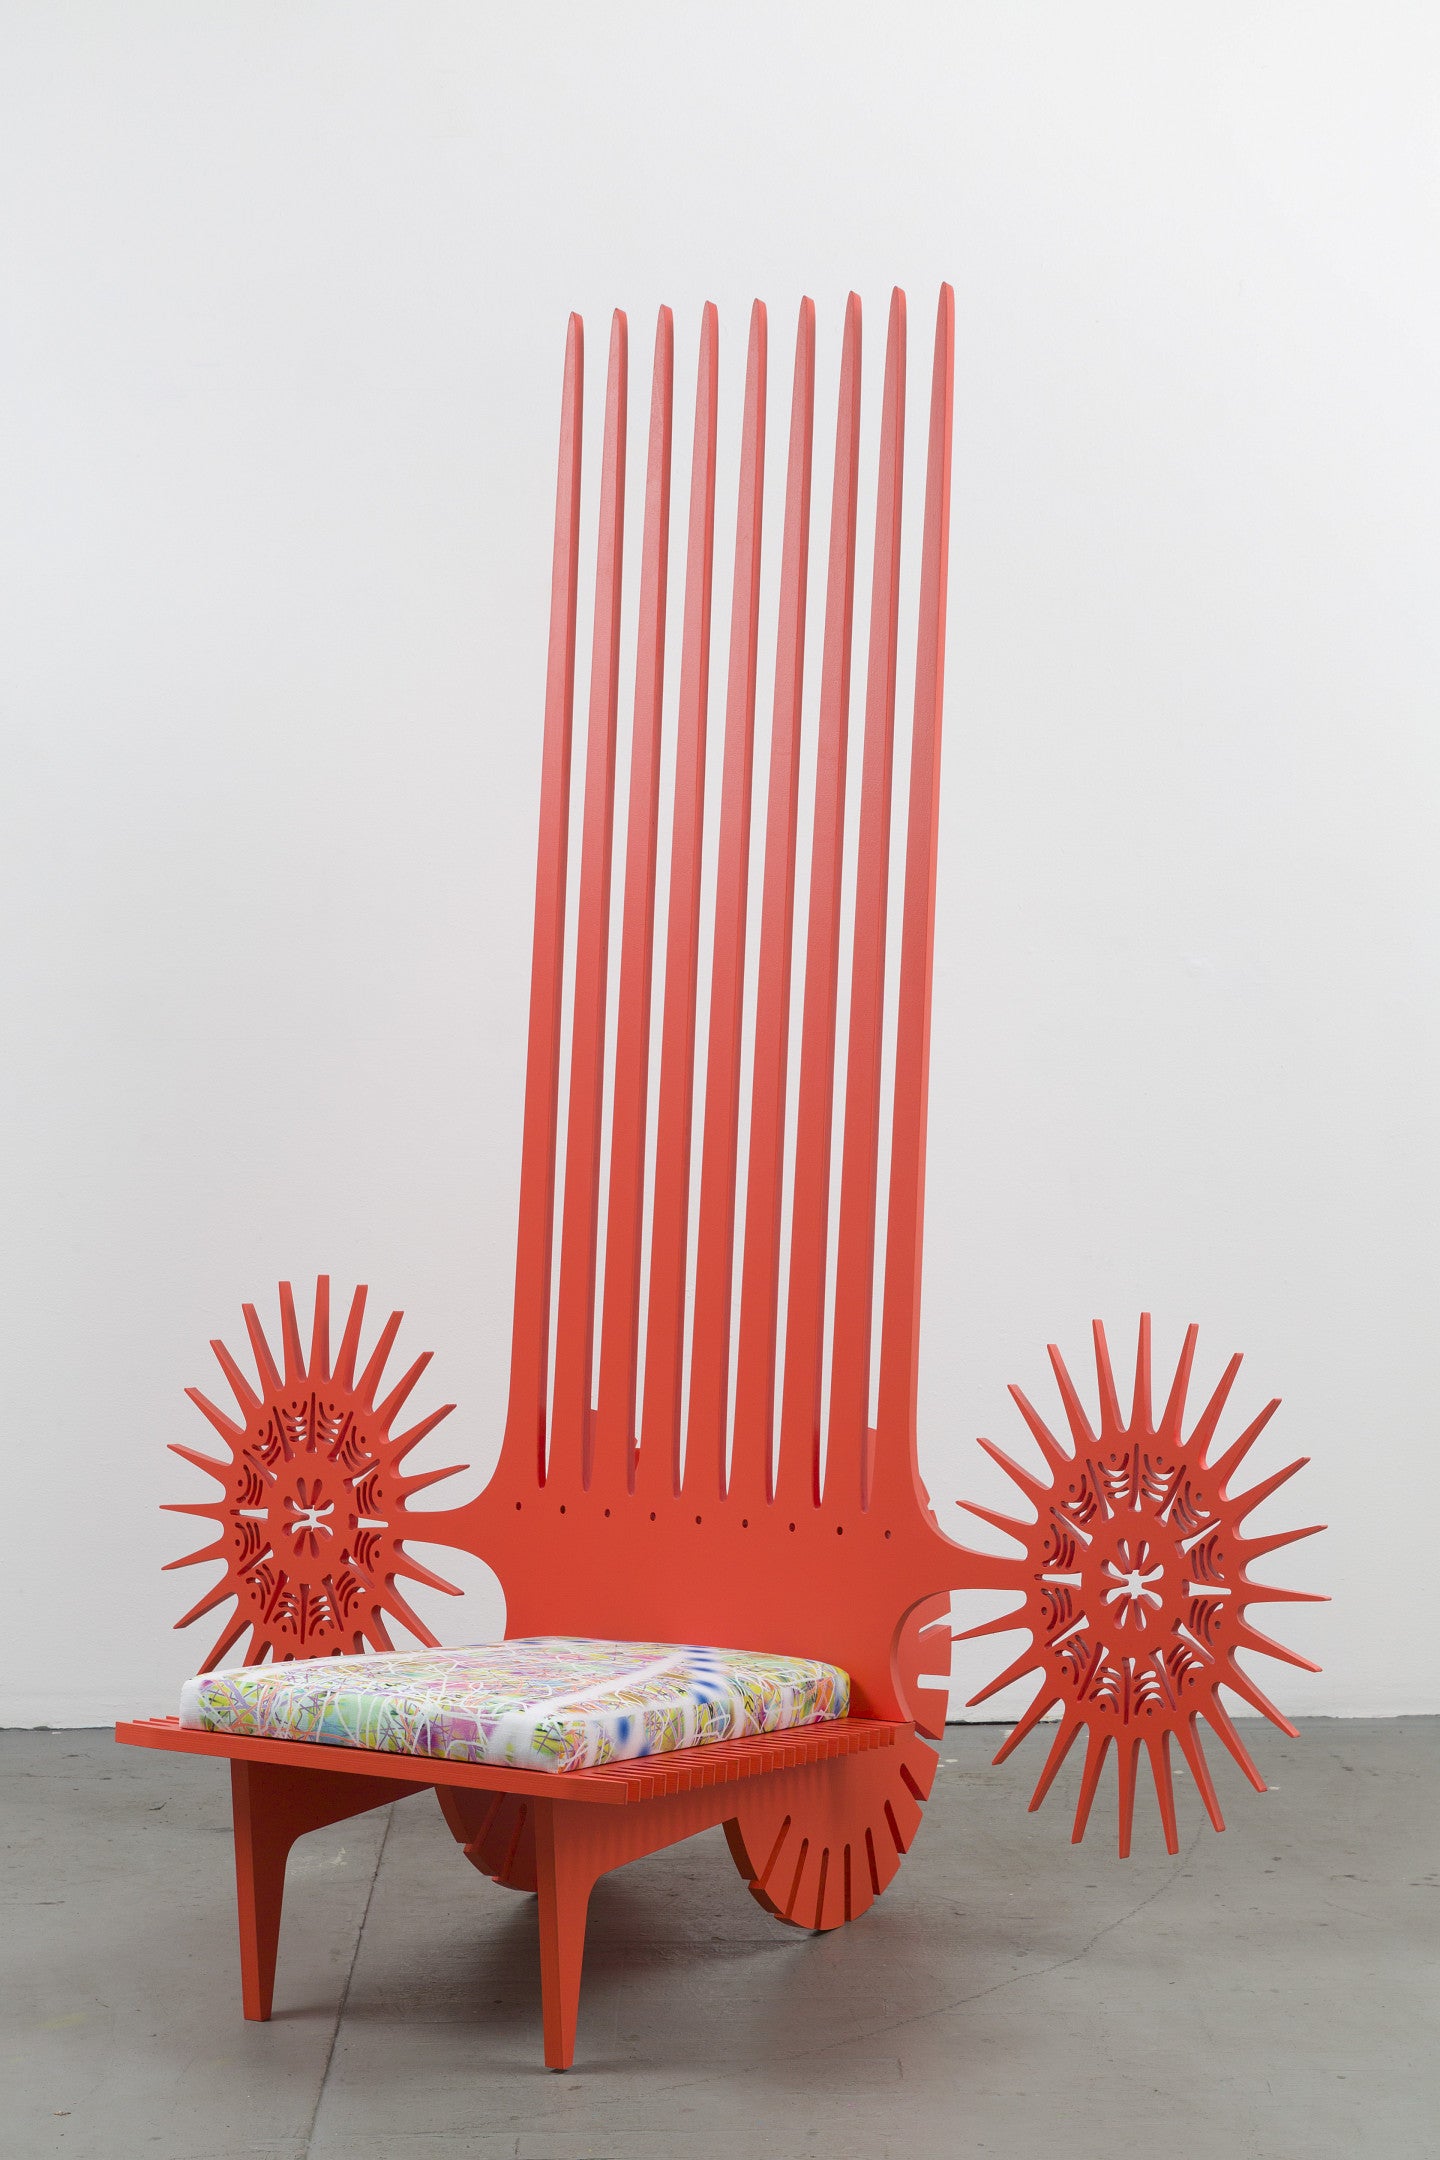 PXOPXO-CHAIR   2022   Wood, enamel paint and artist’s upholstery   84 x 76 x 46 inches 